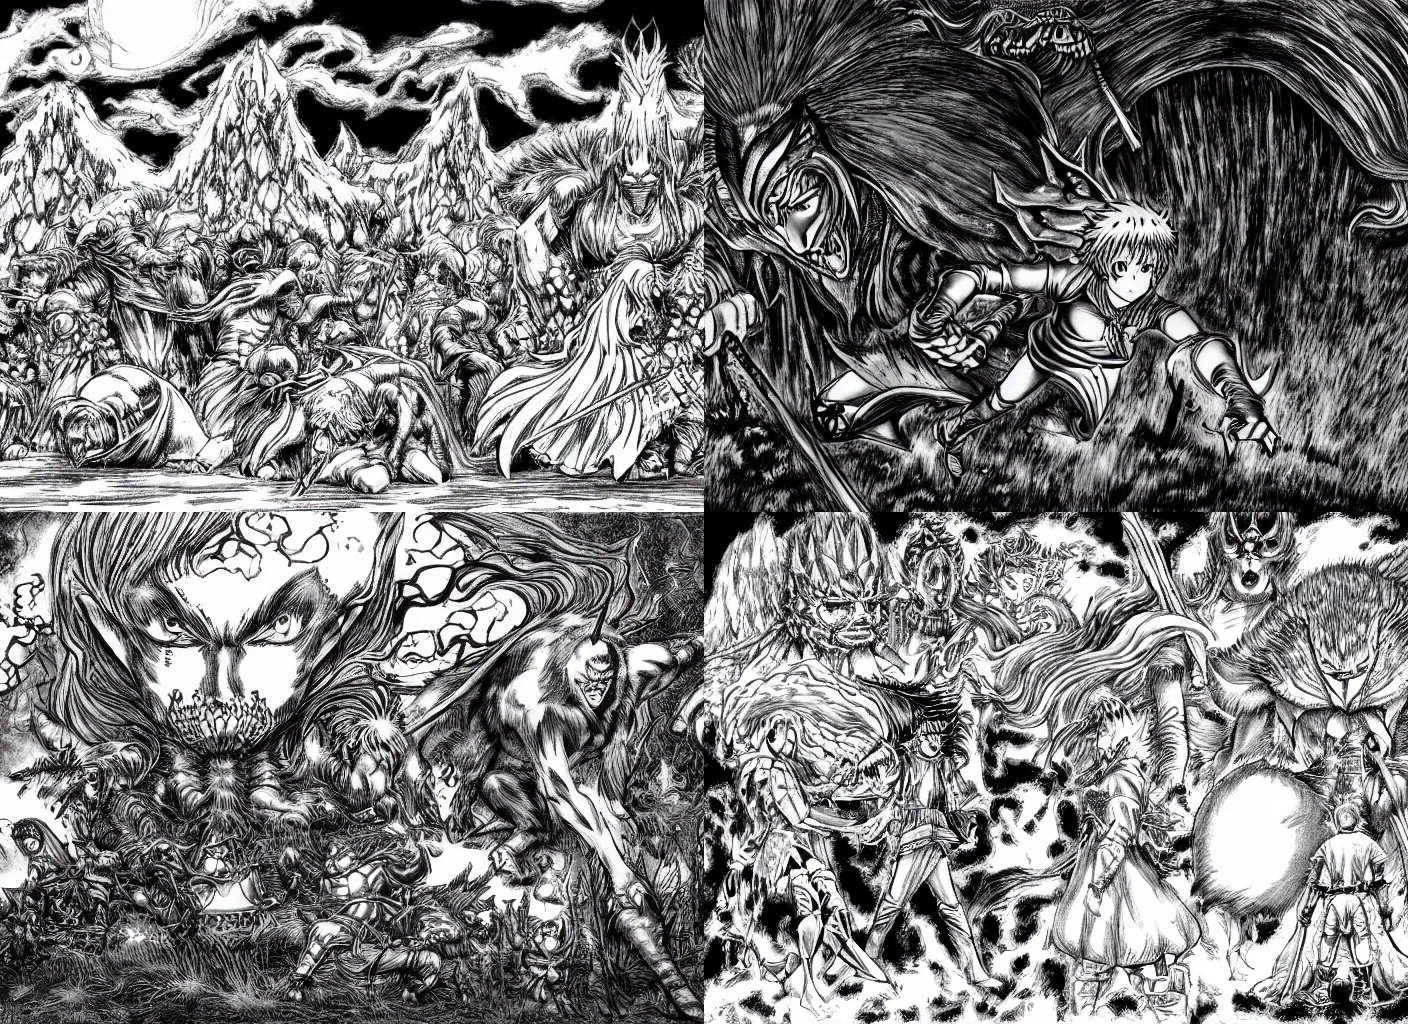 My fantasy manga wich graphic style is stronly inspired by Kentaro